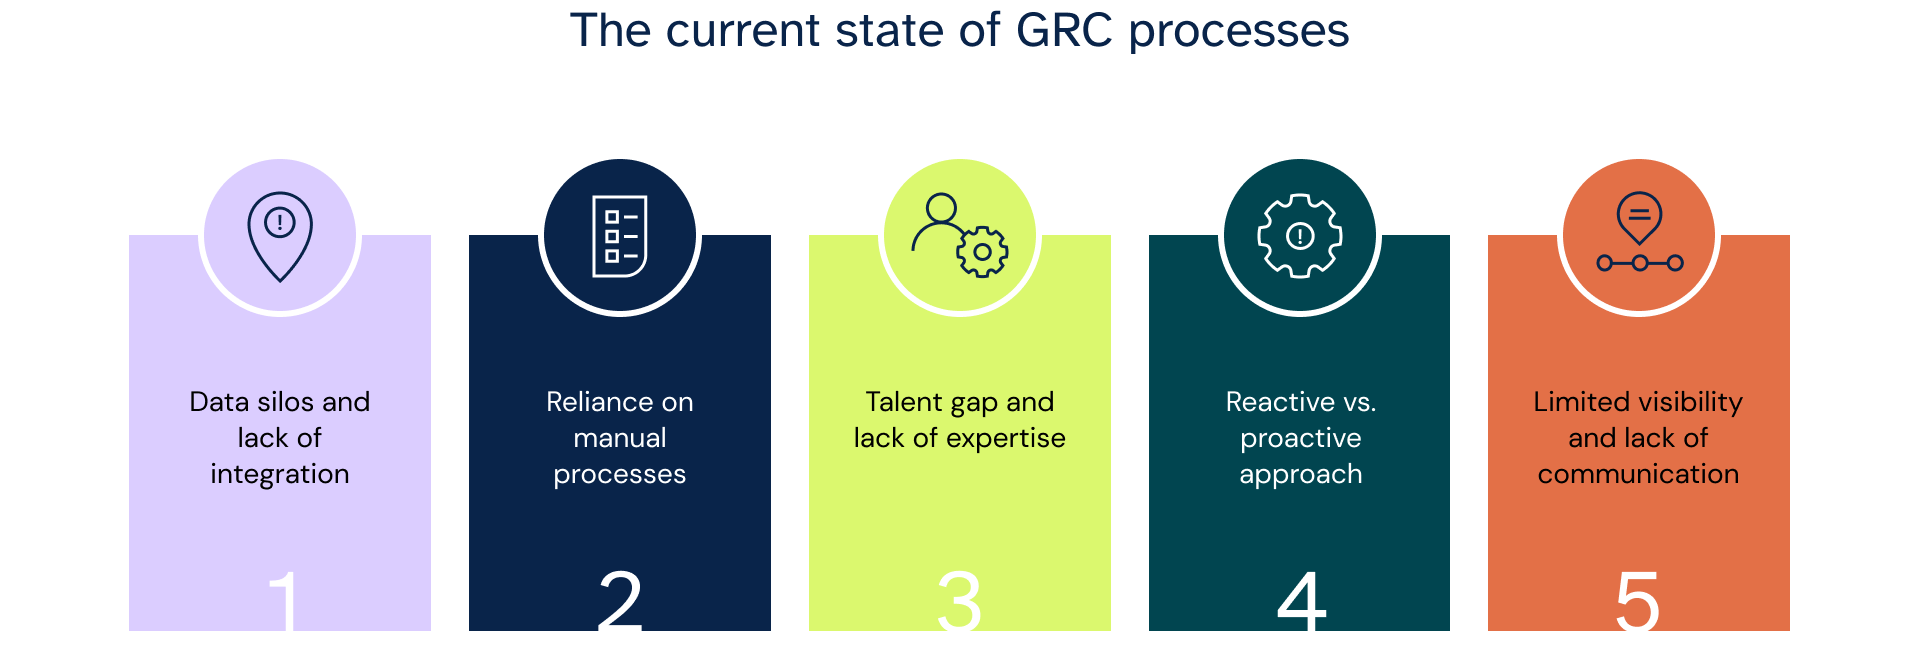 The current state of GRC processes